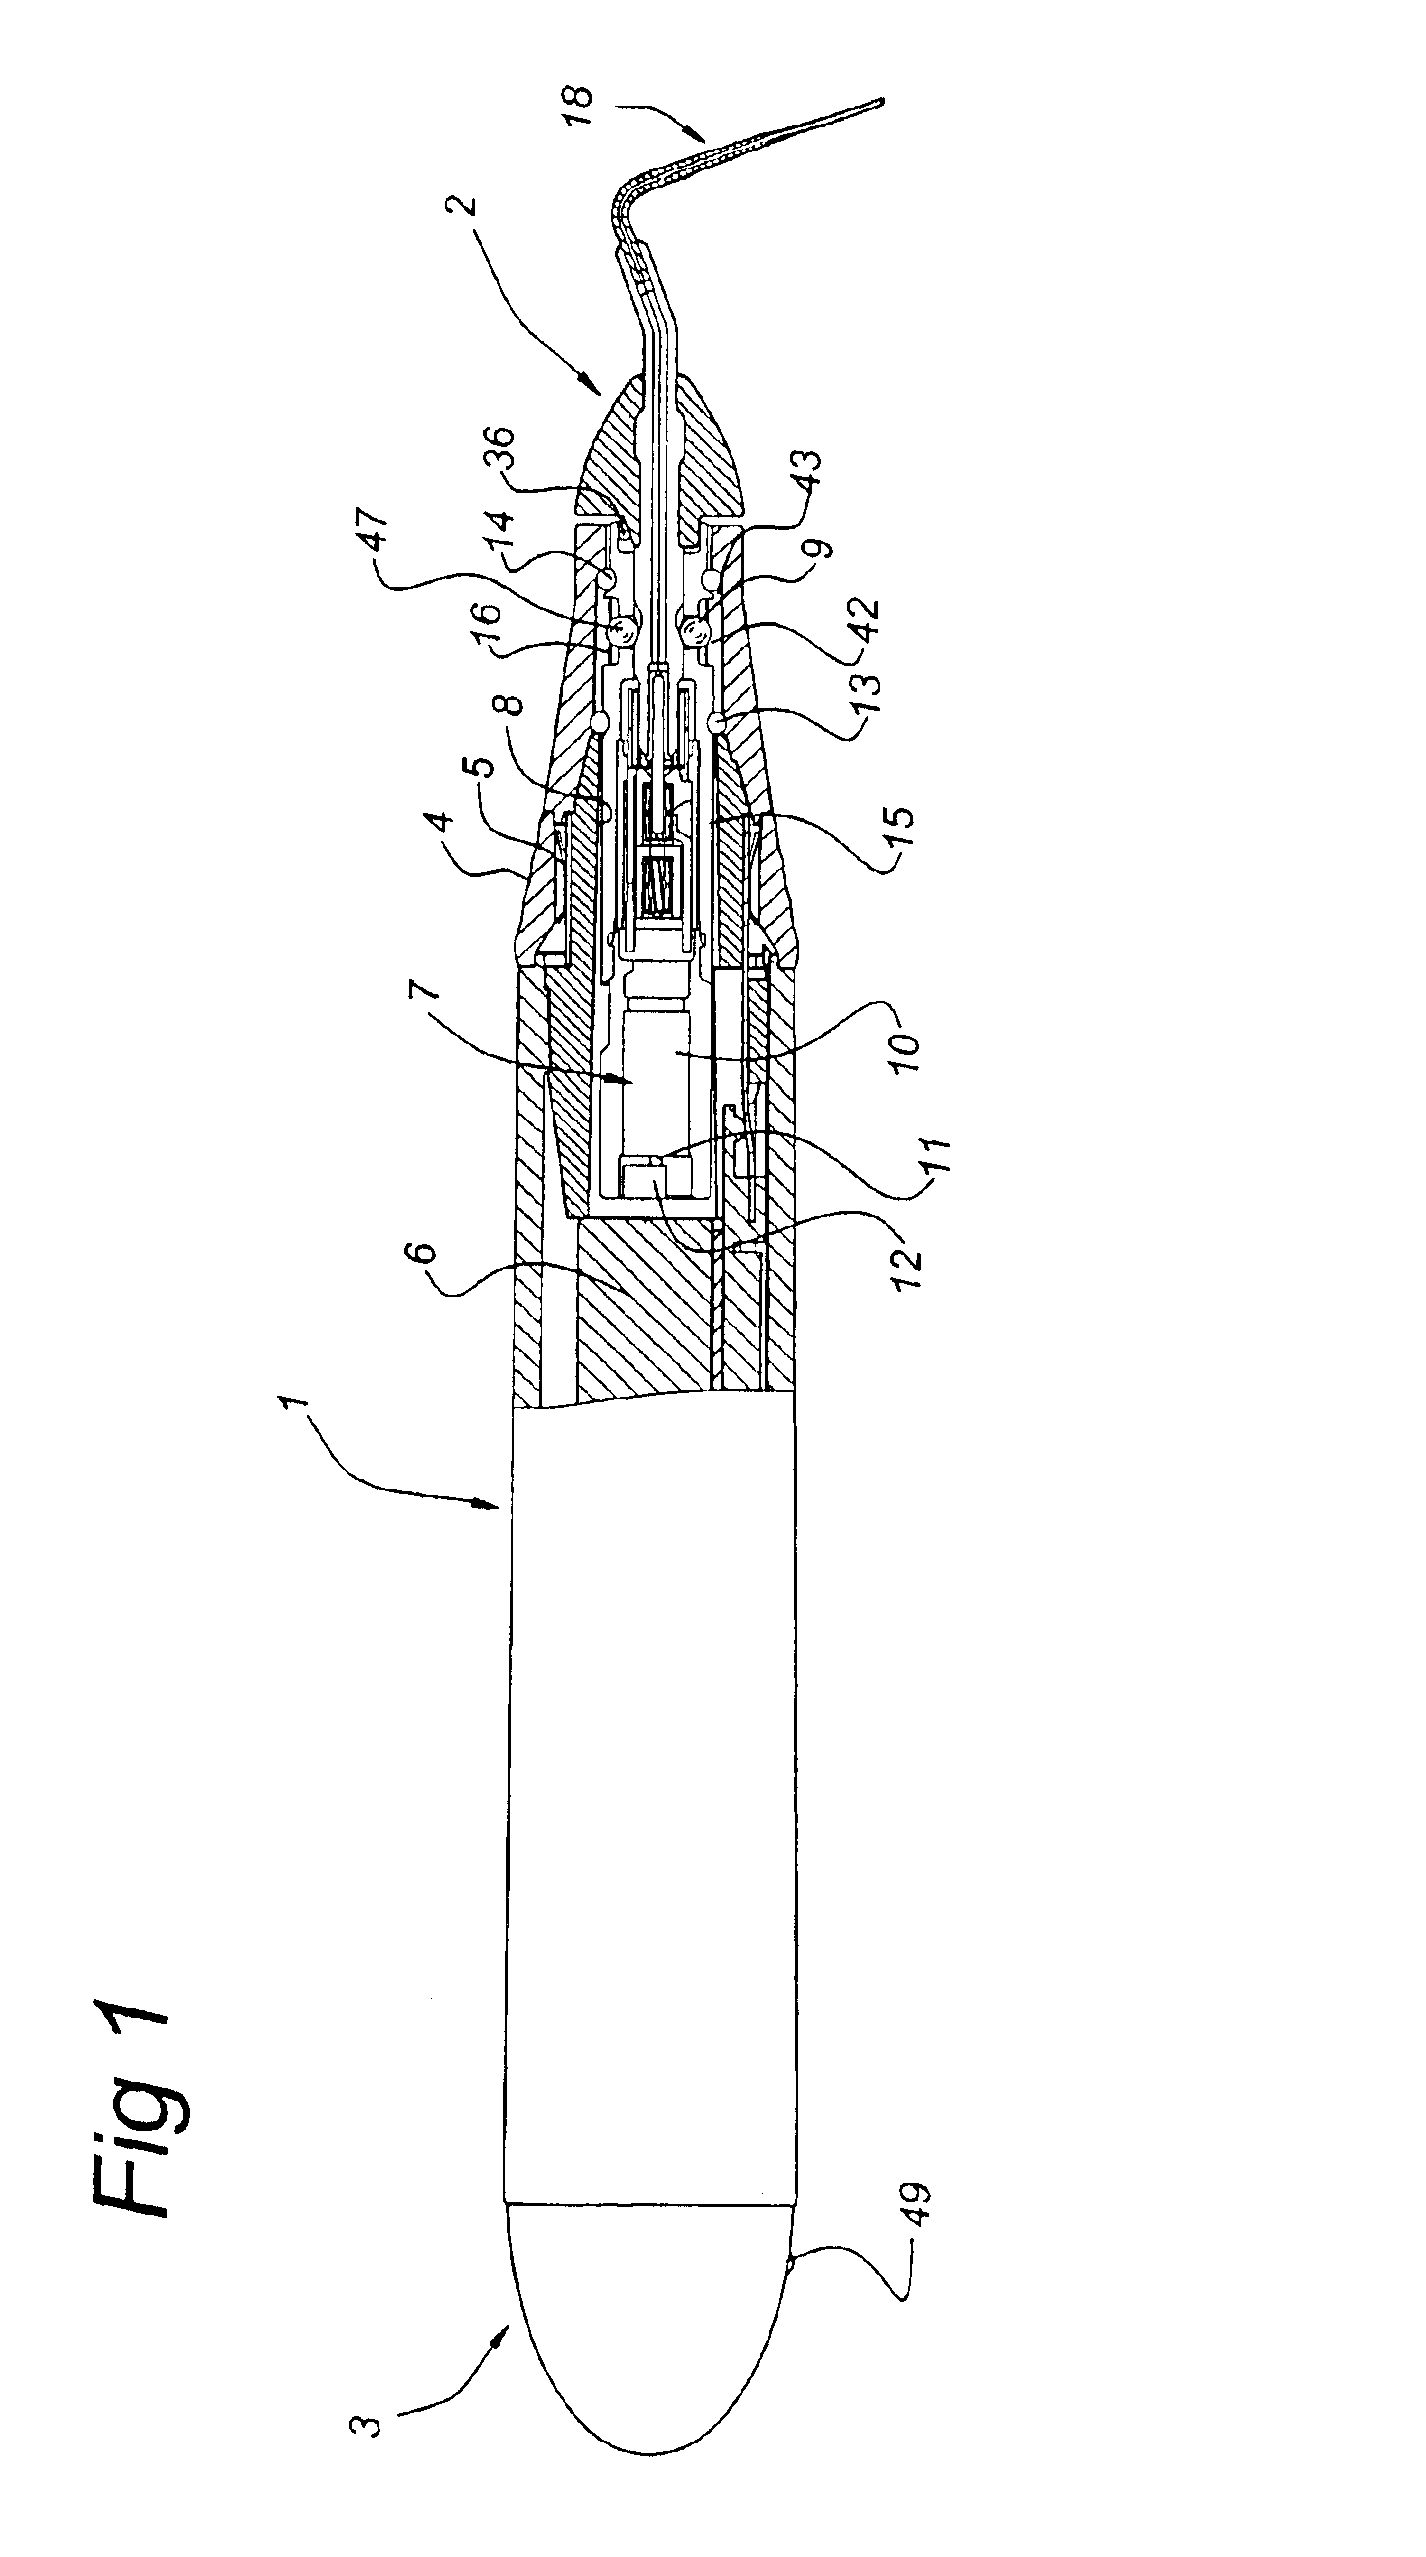 Device for performing an endodontic treatment